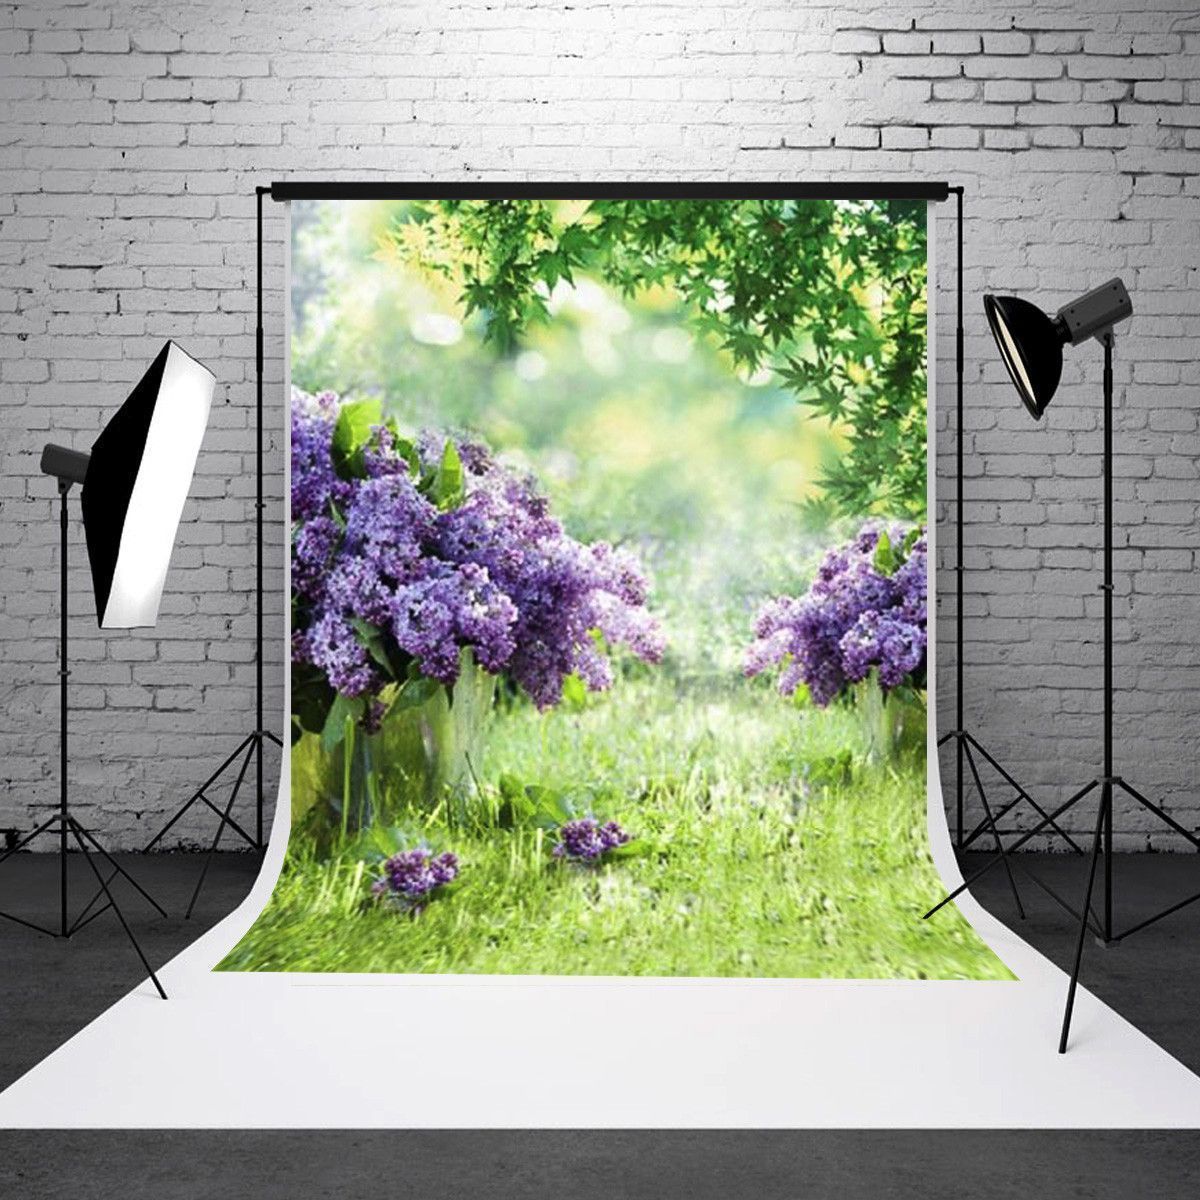 Spring-Outdoor-Green-Grass-Photography-Background-Backdrop-For-Studio-3x5ft-1130361